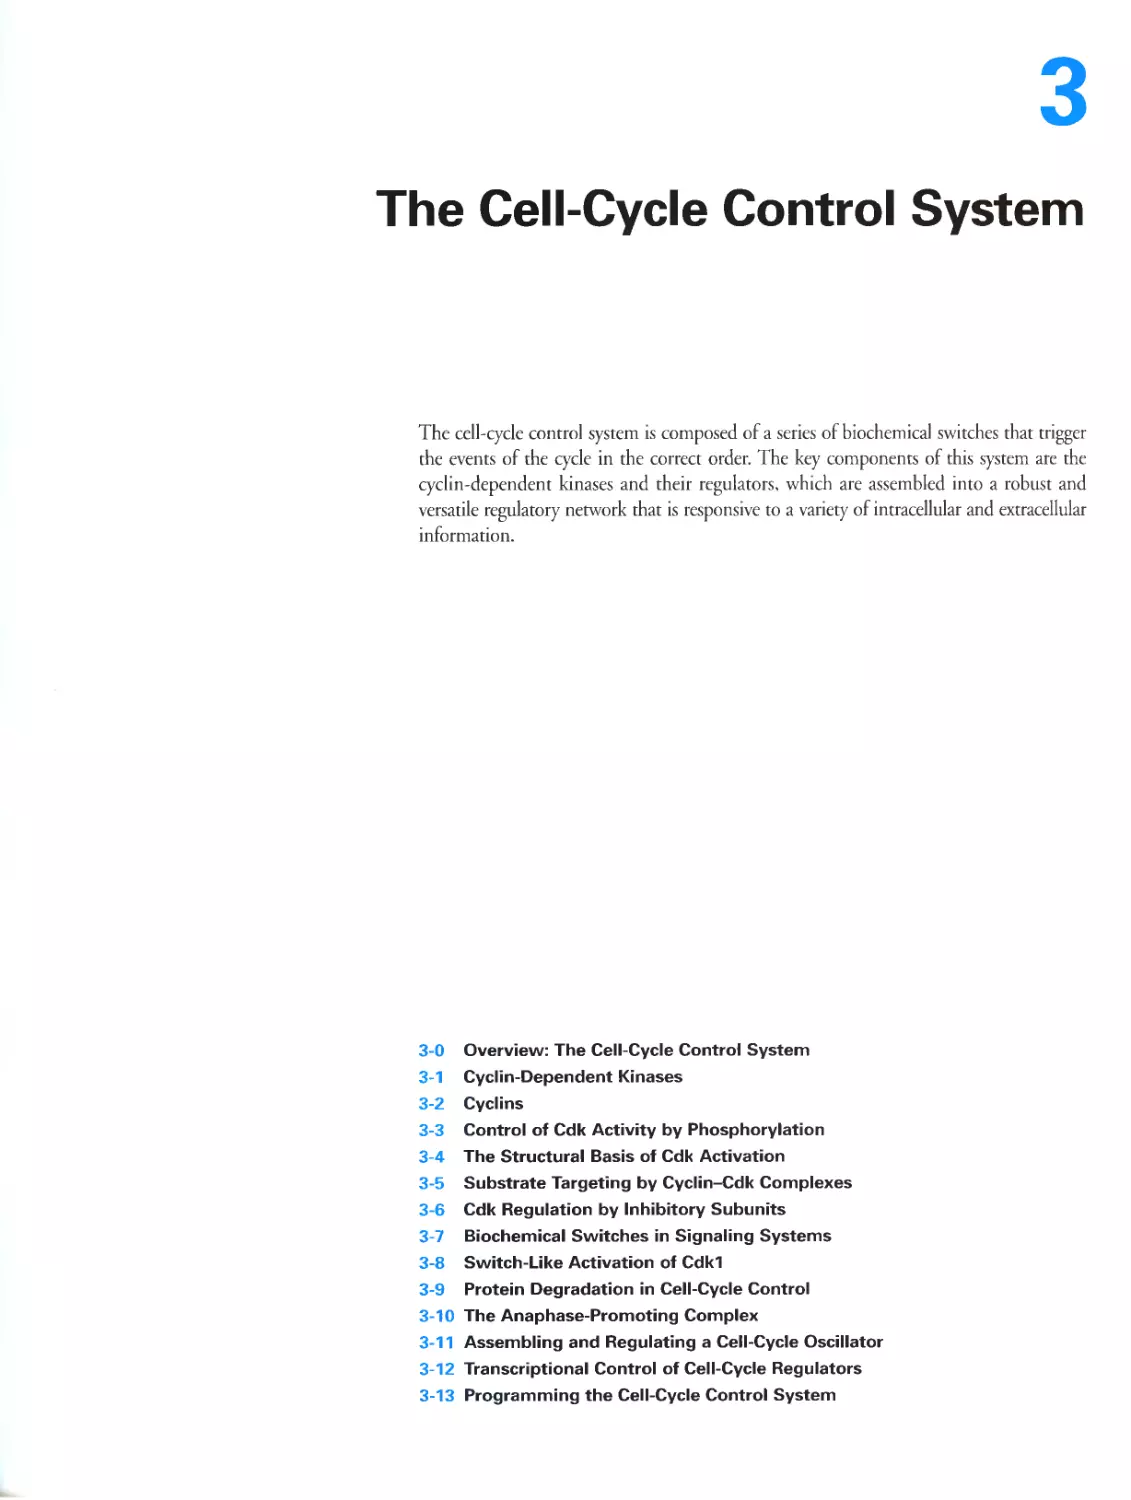 Chapter 3. The Cell-Cycle Control System